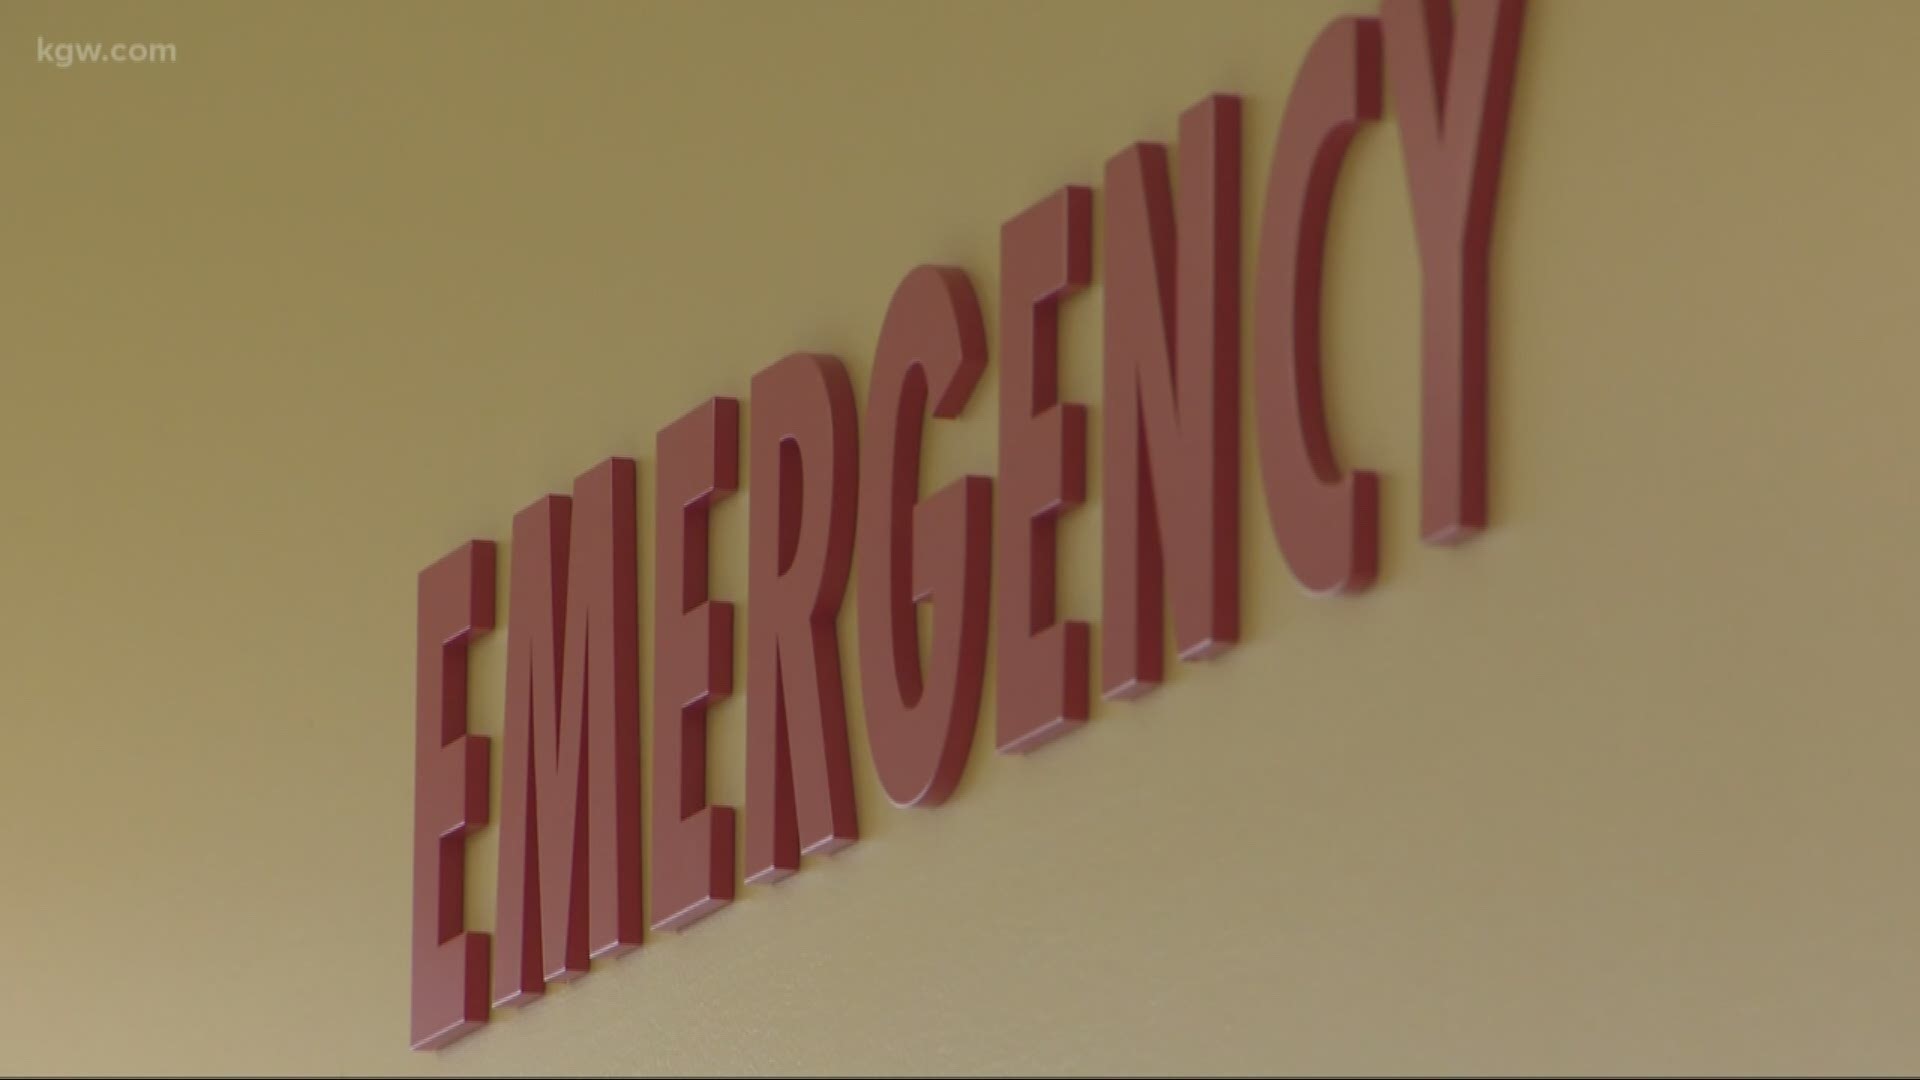 Rural hospitals are hurting during the COVID-19 pandemic. Pat Dooris reports.